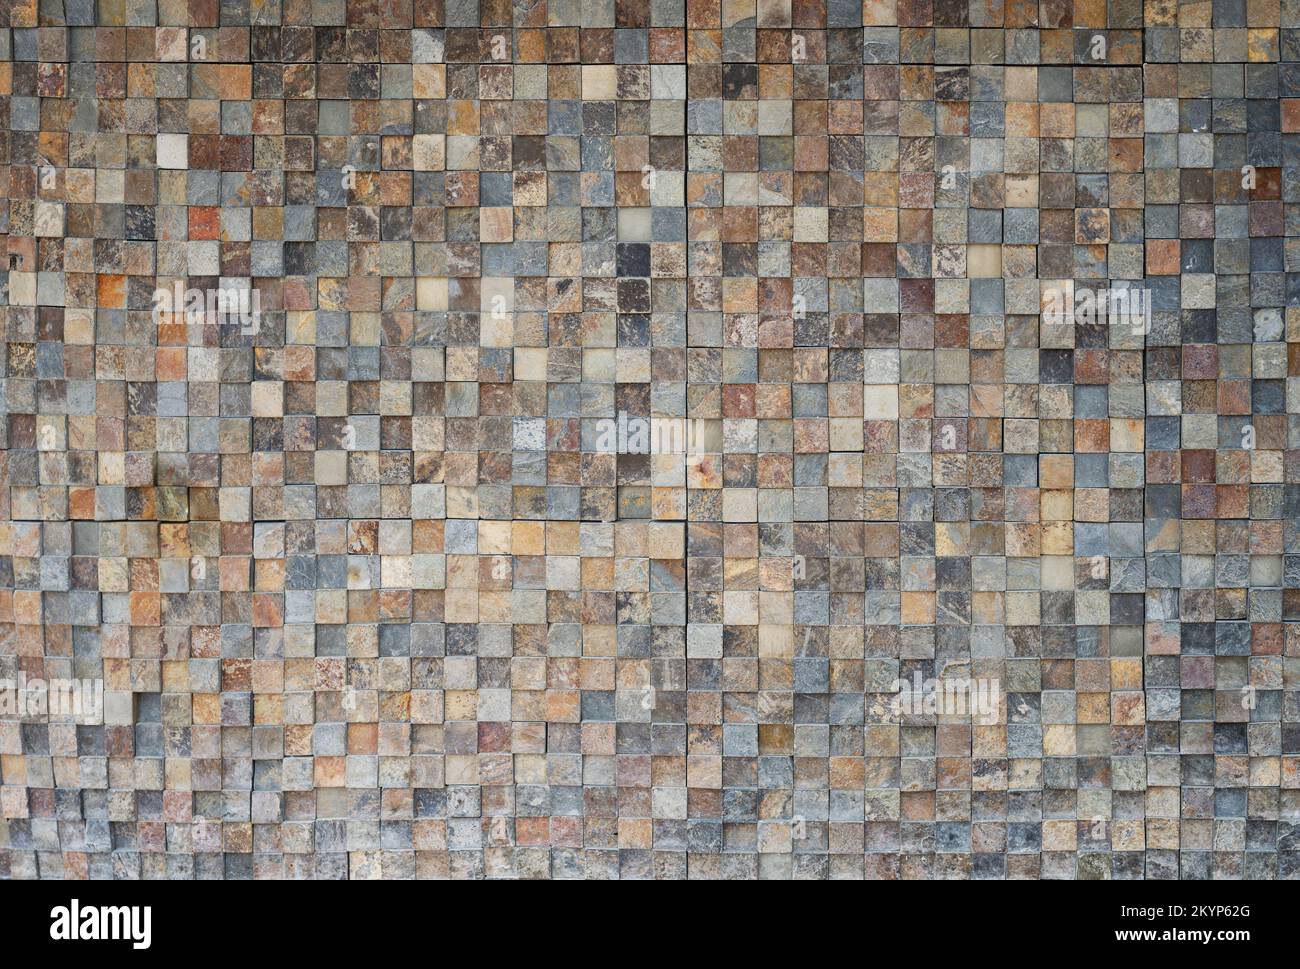 Square brown color floor tiles pattern background close up view Stock Photo